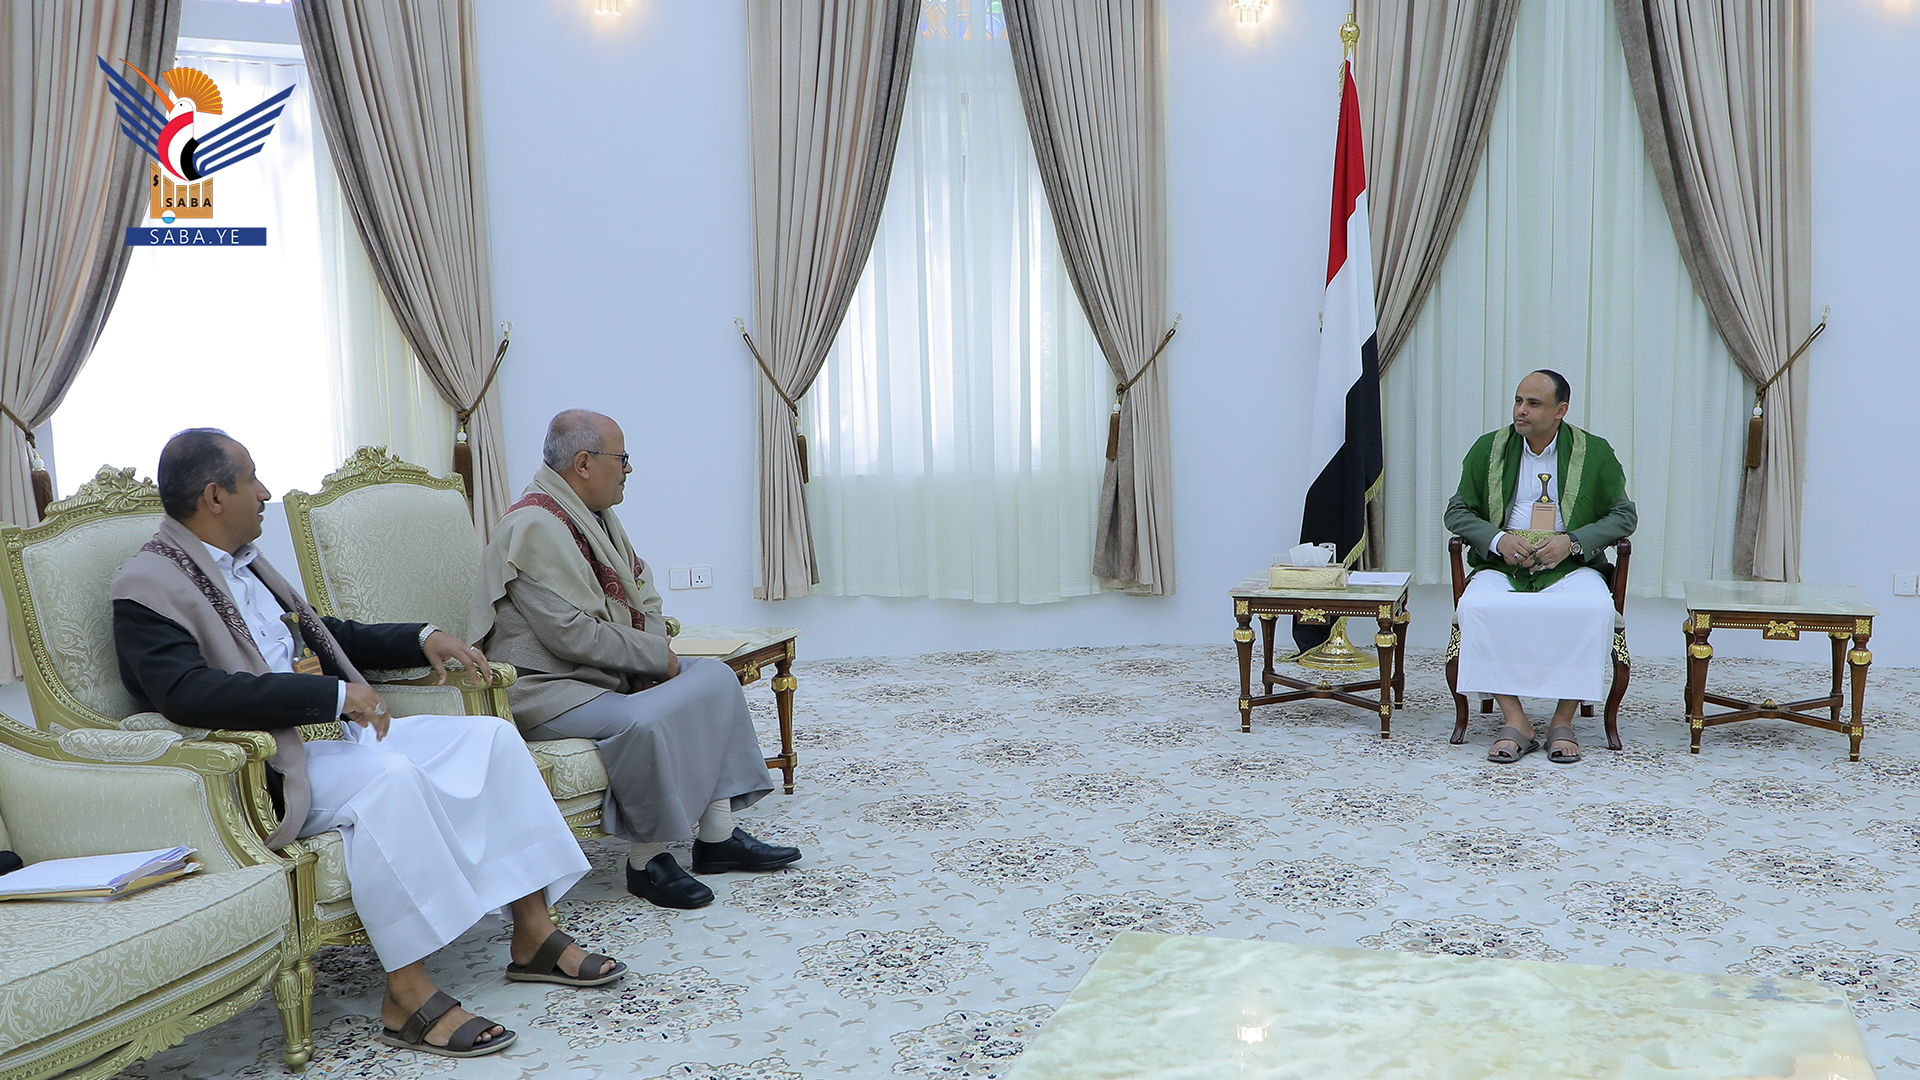 President Al-Mashat stresses importance of agricultural researches to achieve food security in Yemen